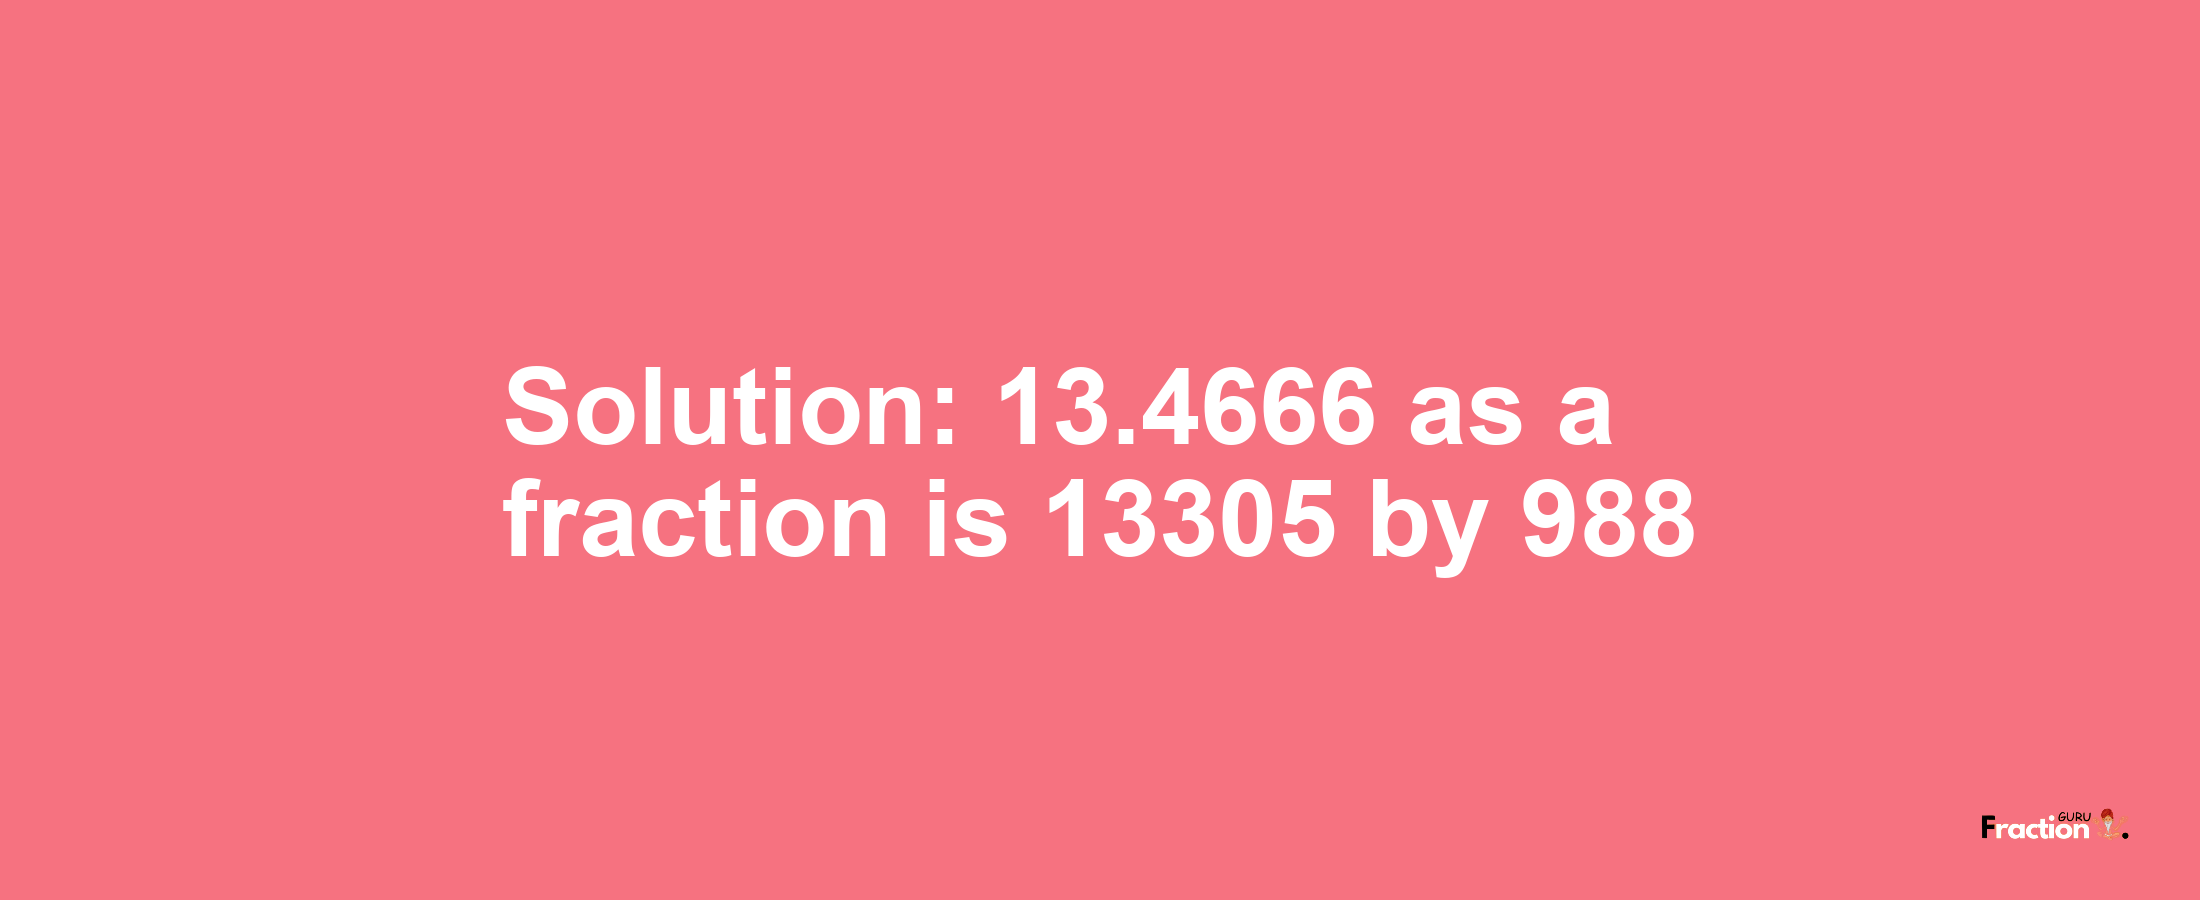 Solution:13.4666 as a fraction is 13305/988